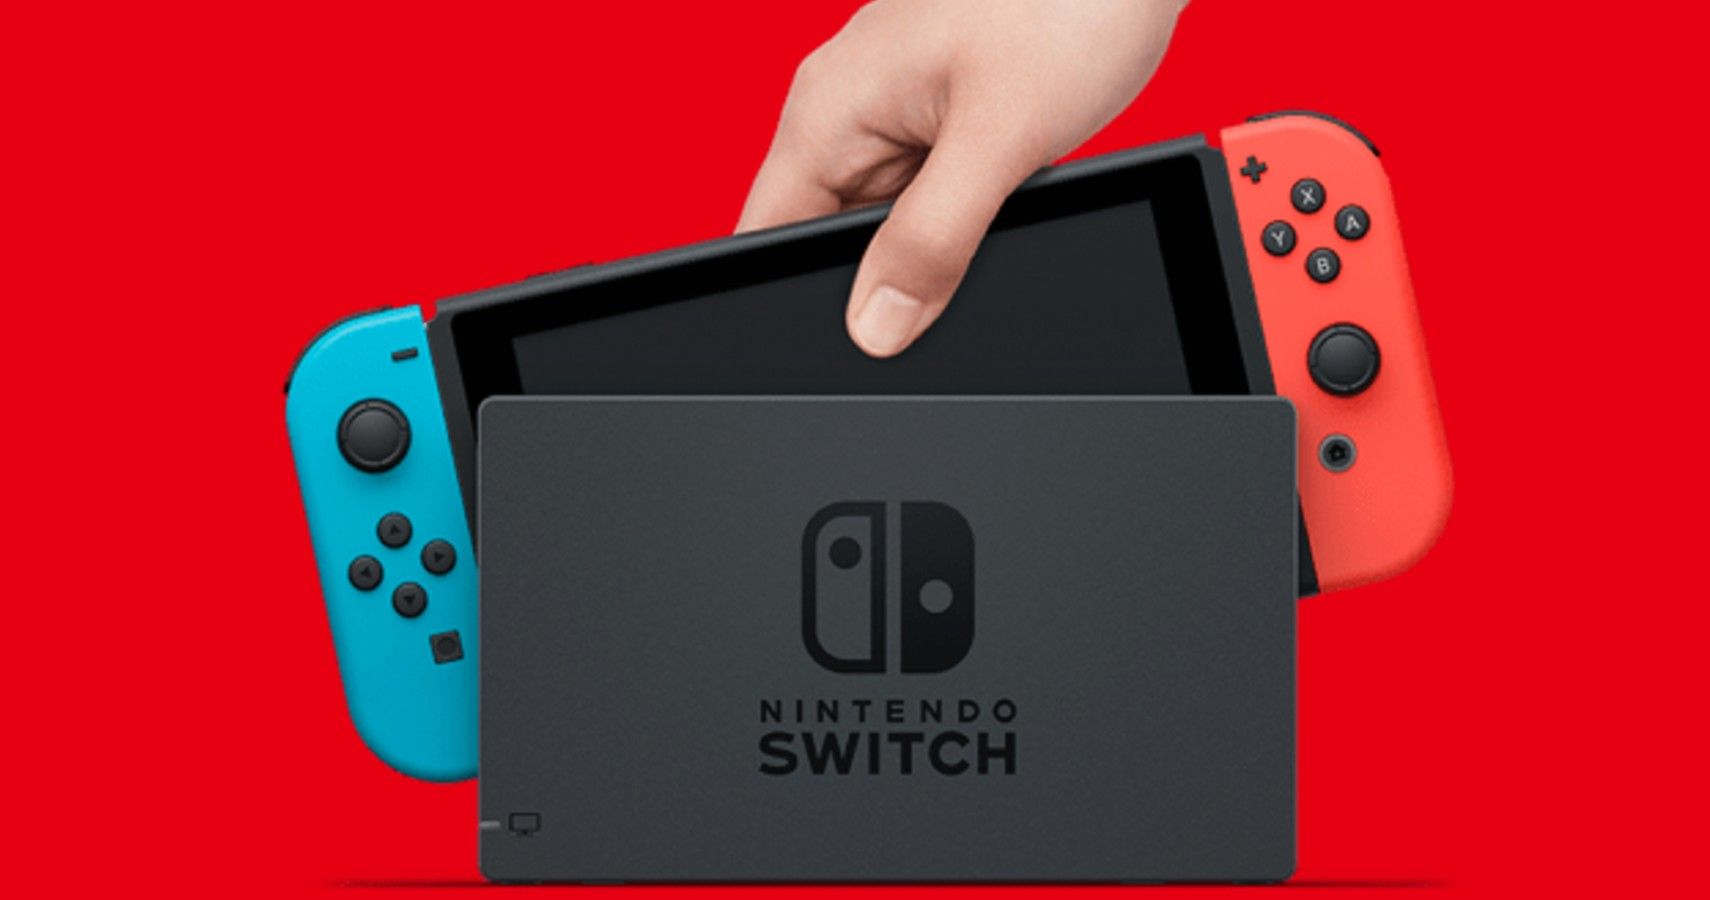 Nintendo Switch Pro To Be Announced Very Soon According To New Report